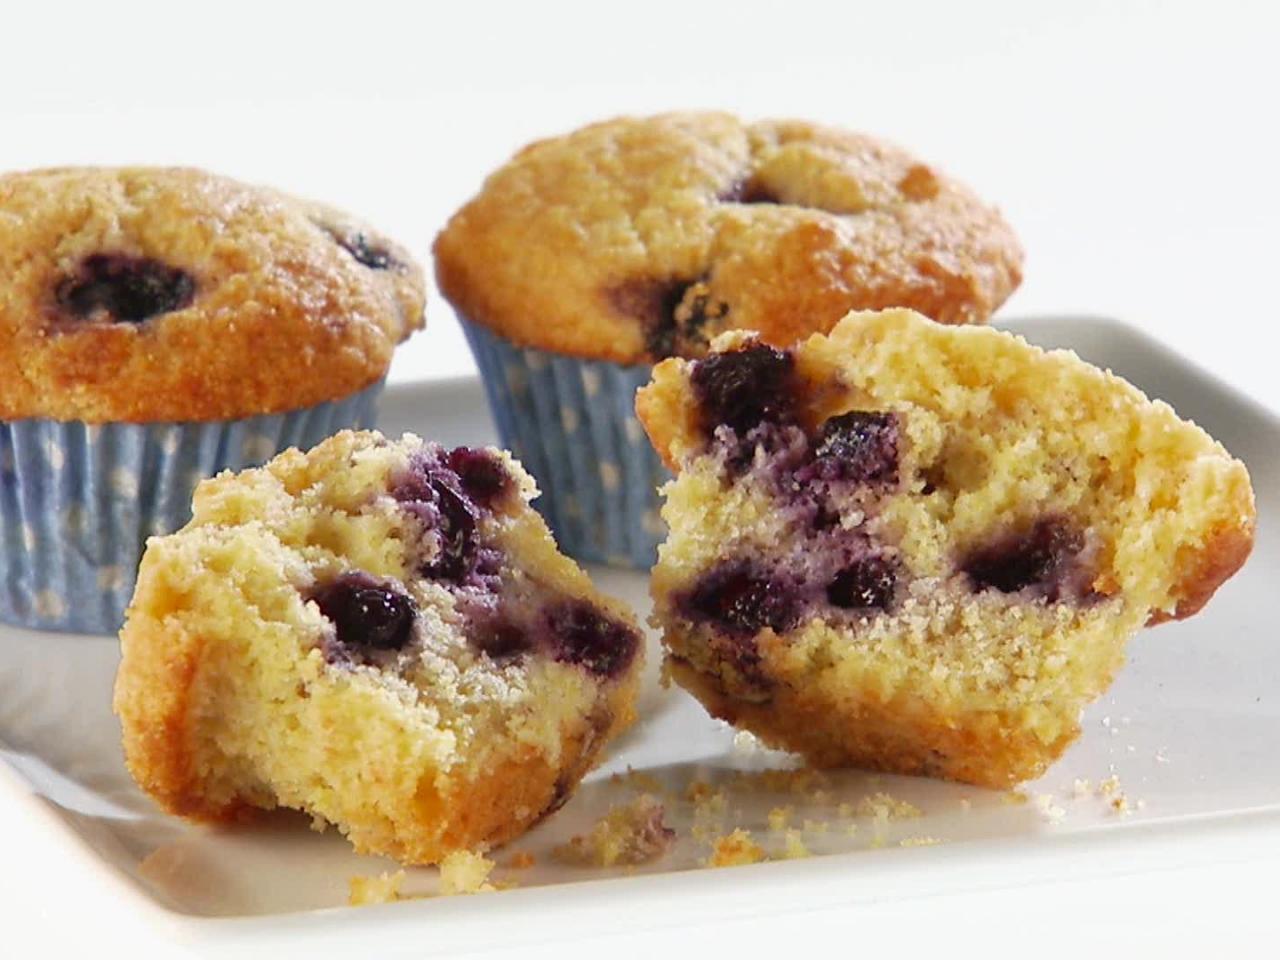 Blueberry Muffin wallpaper, Food, HQ Blueberry Muffin pictureK